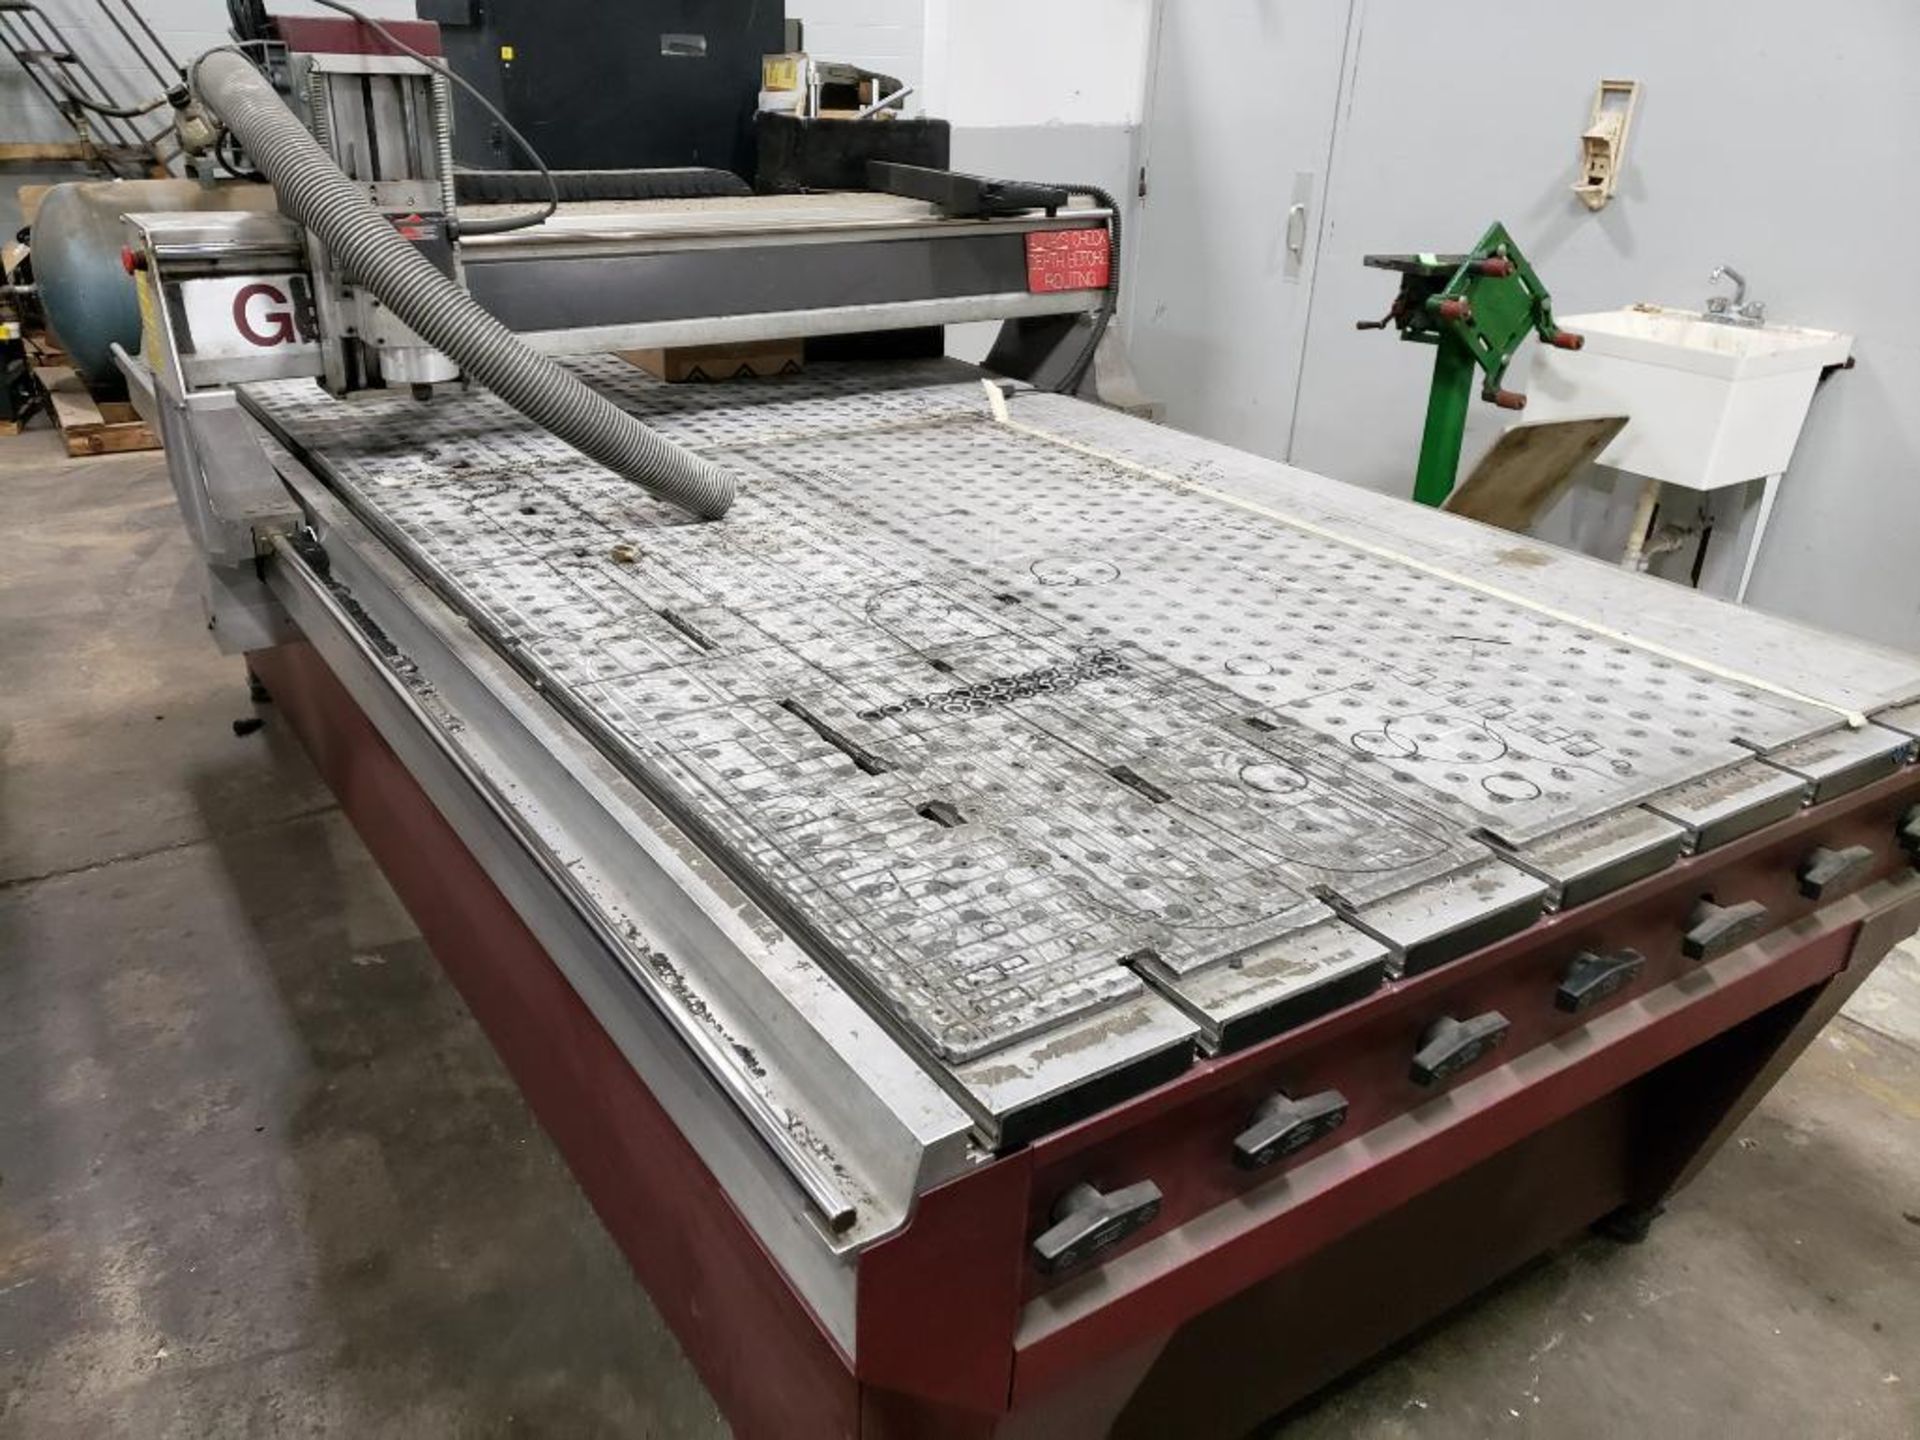 (Parts/Repairable) Gerber Sabre Model 408 CNC router. 54in x 121in table. 208-240v single phase. - Image 19 of 27